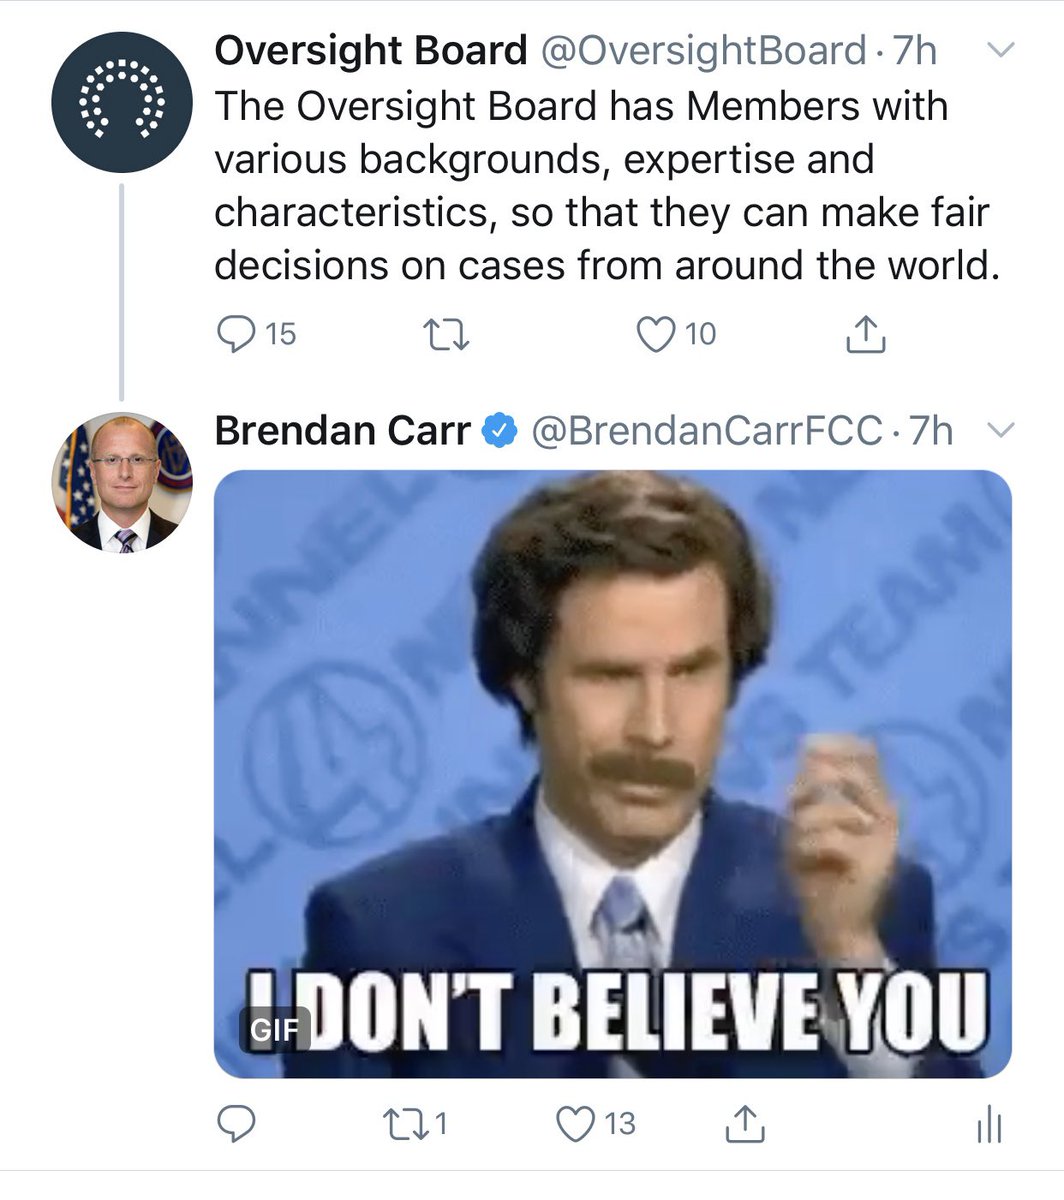 12. The new Facebook  @OversightBoard deleted their tweet after I posted this reply. So now you can longer view my tweet at all on their timeline.It would appear things are off to a good start in terms of their tolerance and support for free expression.